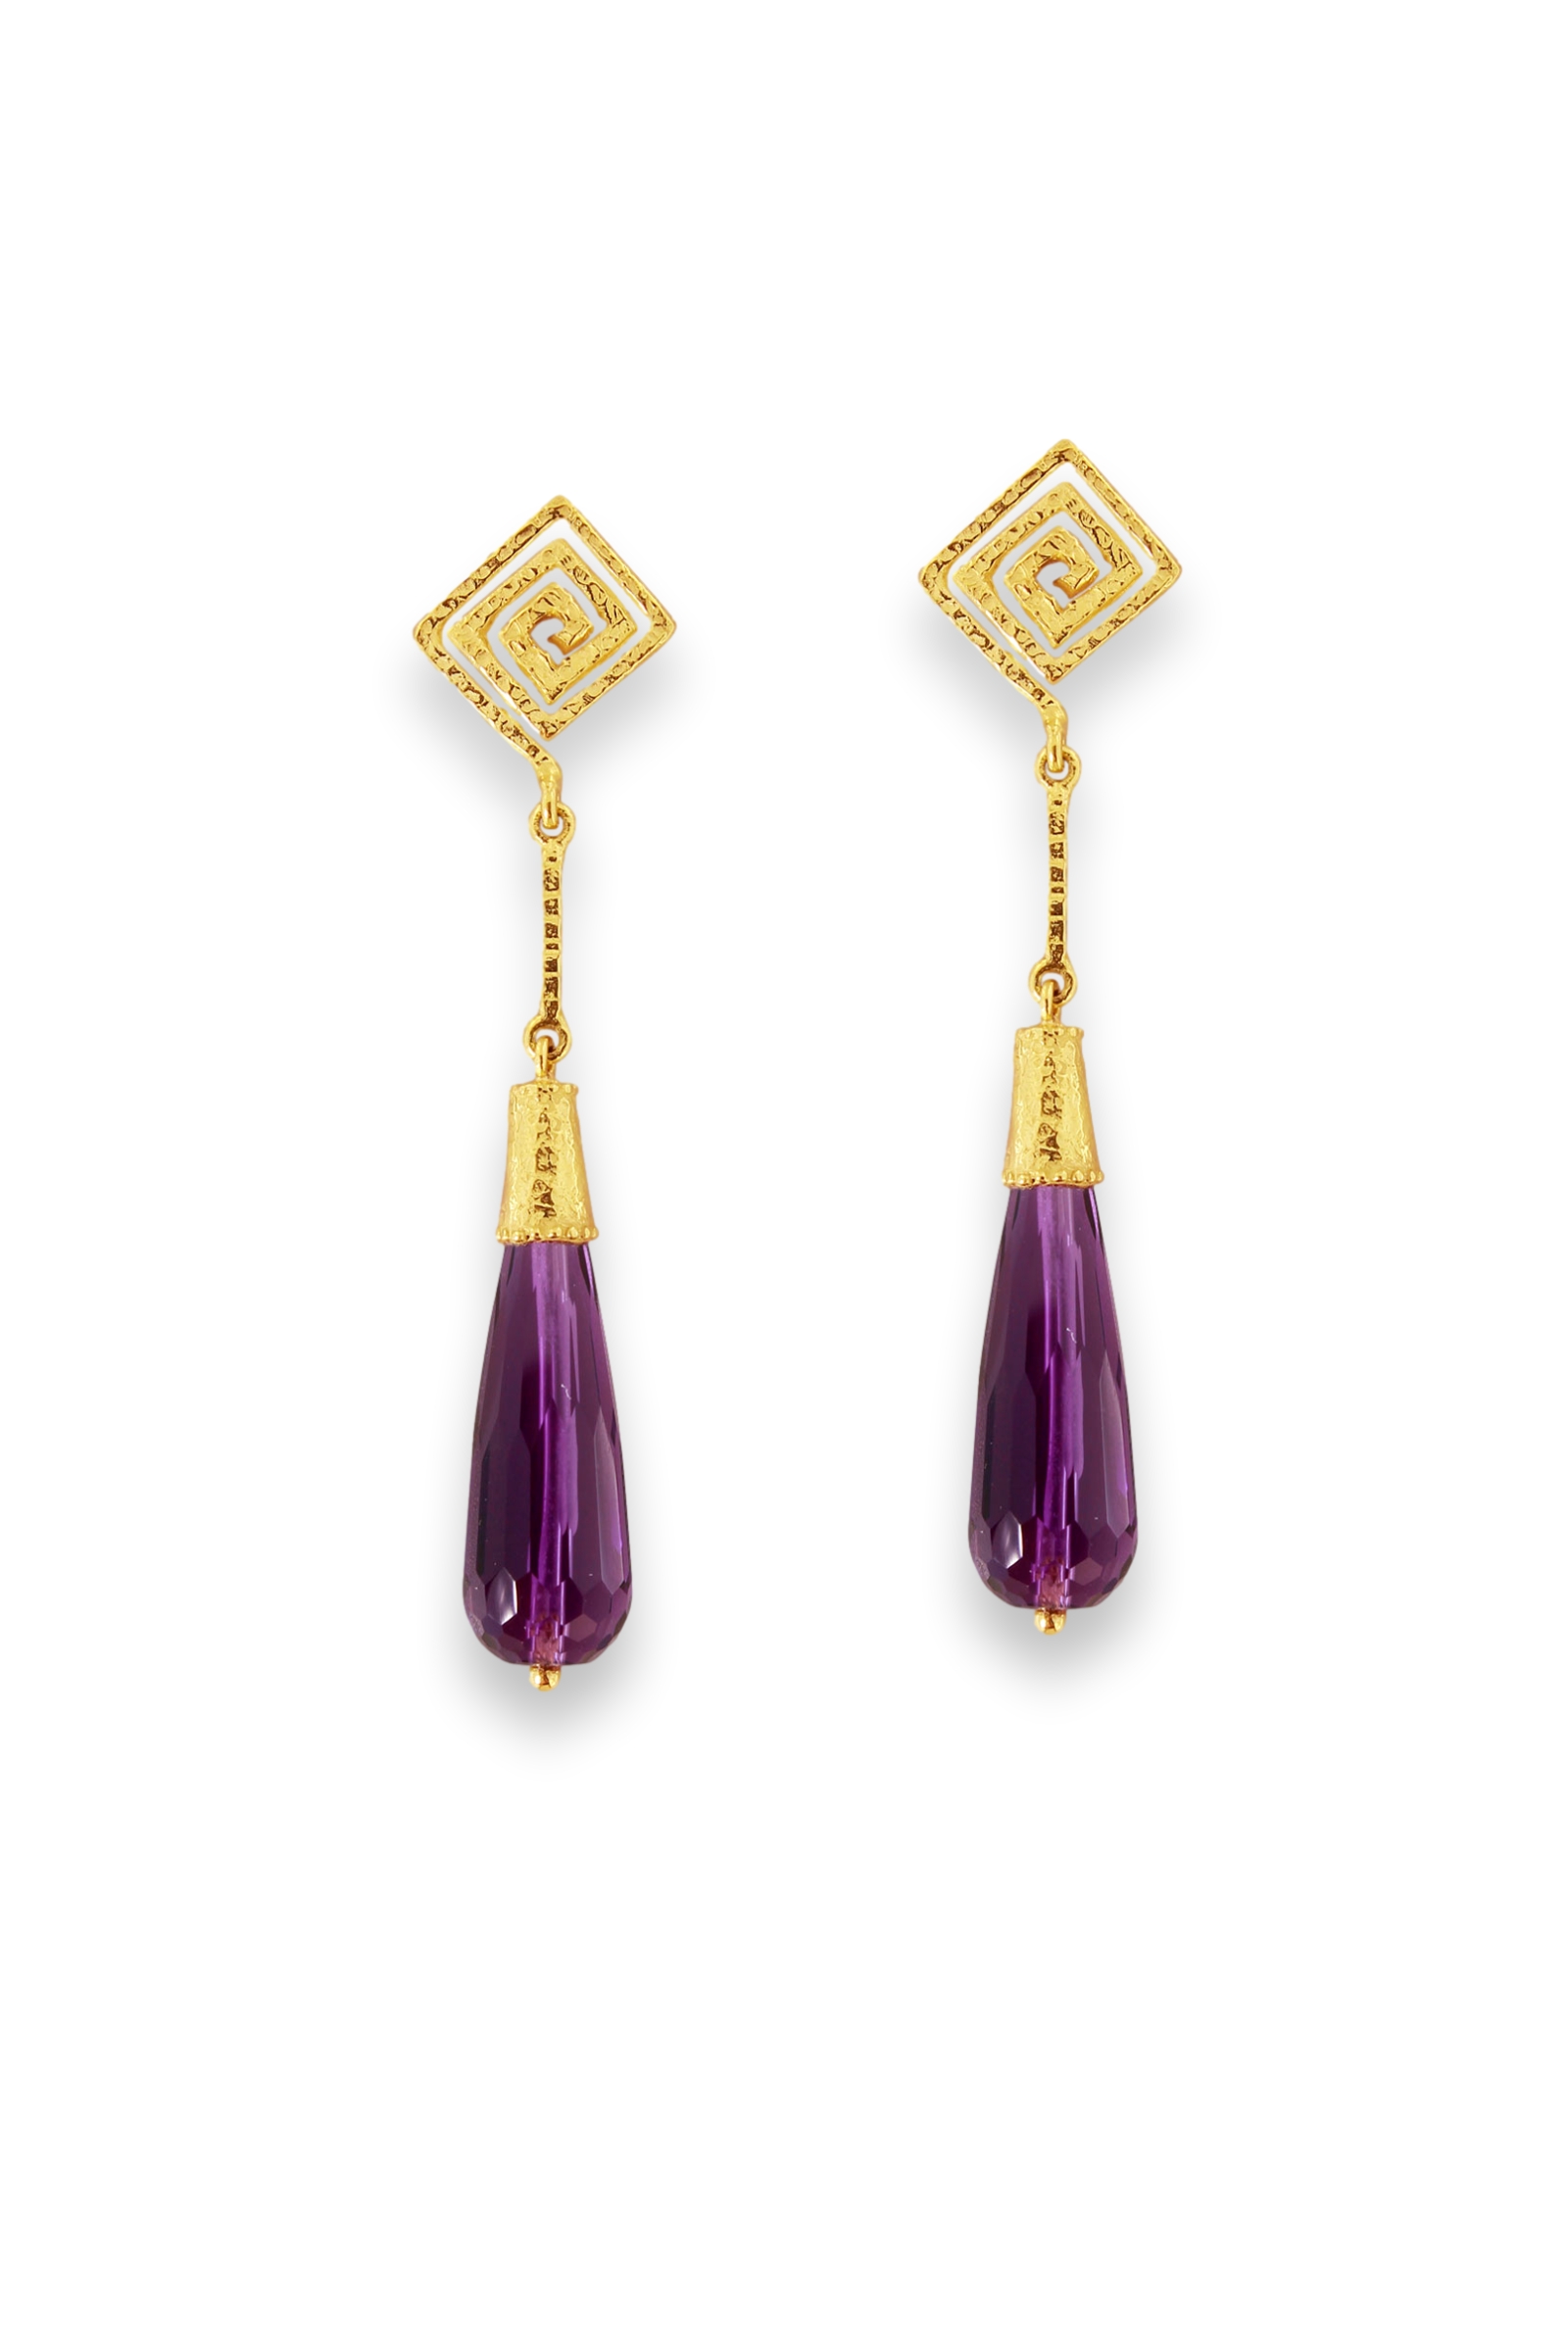 SD271B-18-Kt-Yellow-Gold-Pendant-Earrings-with-Purple-Amethyst-1_clipped_rev_3